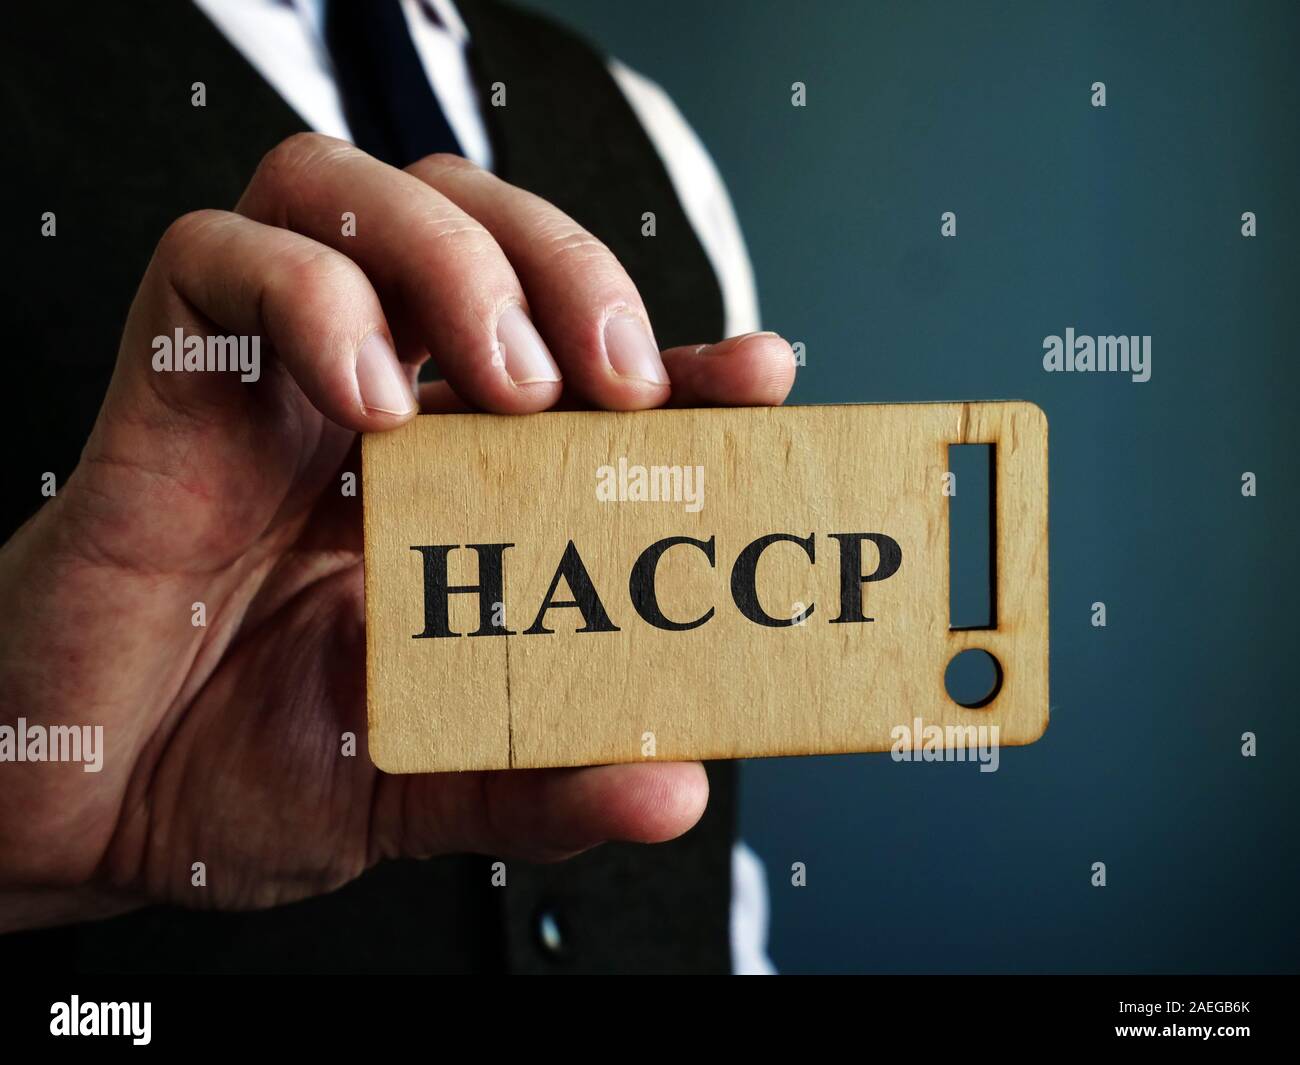 Hazard Analysis and Critical Control Points HACCP in the hands of a manager. Stock Photo